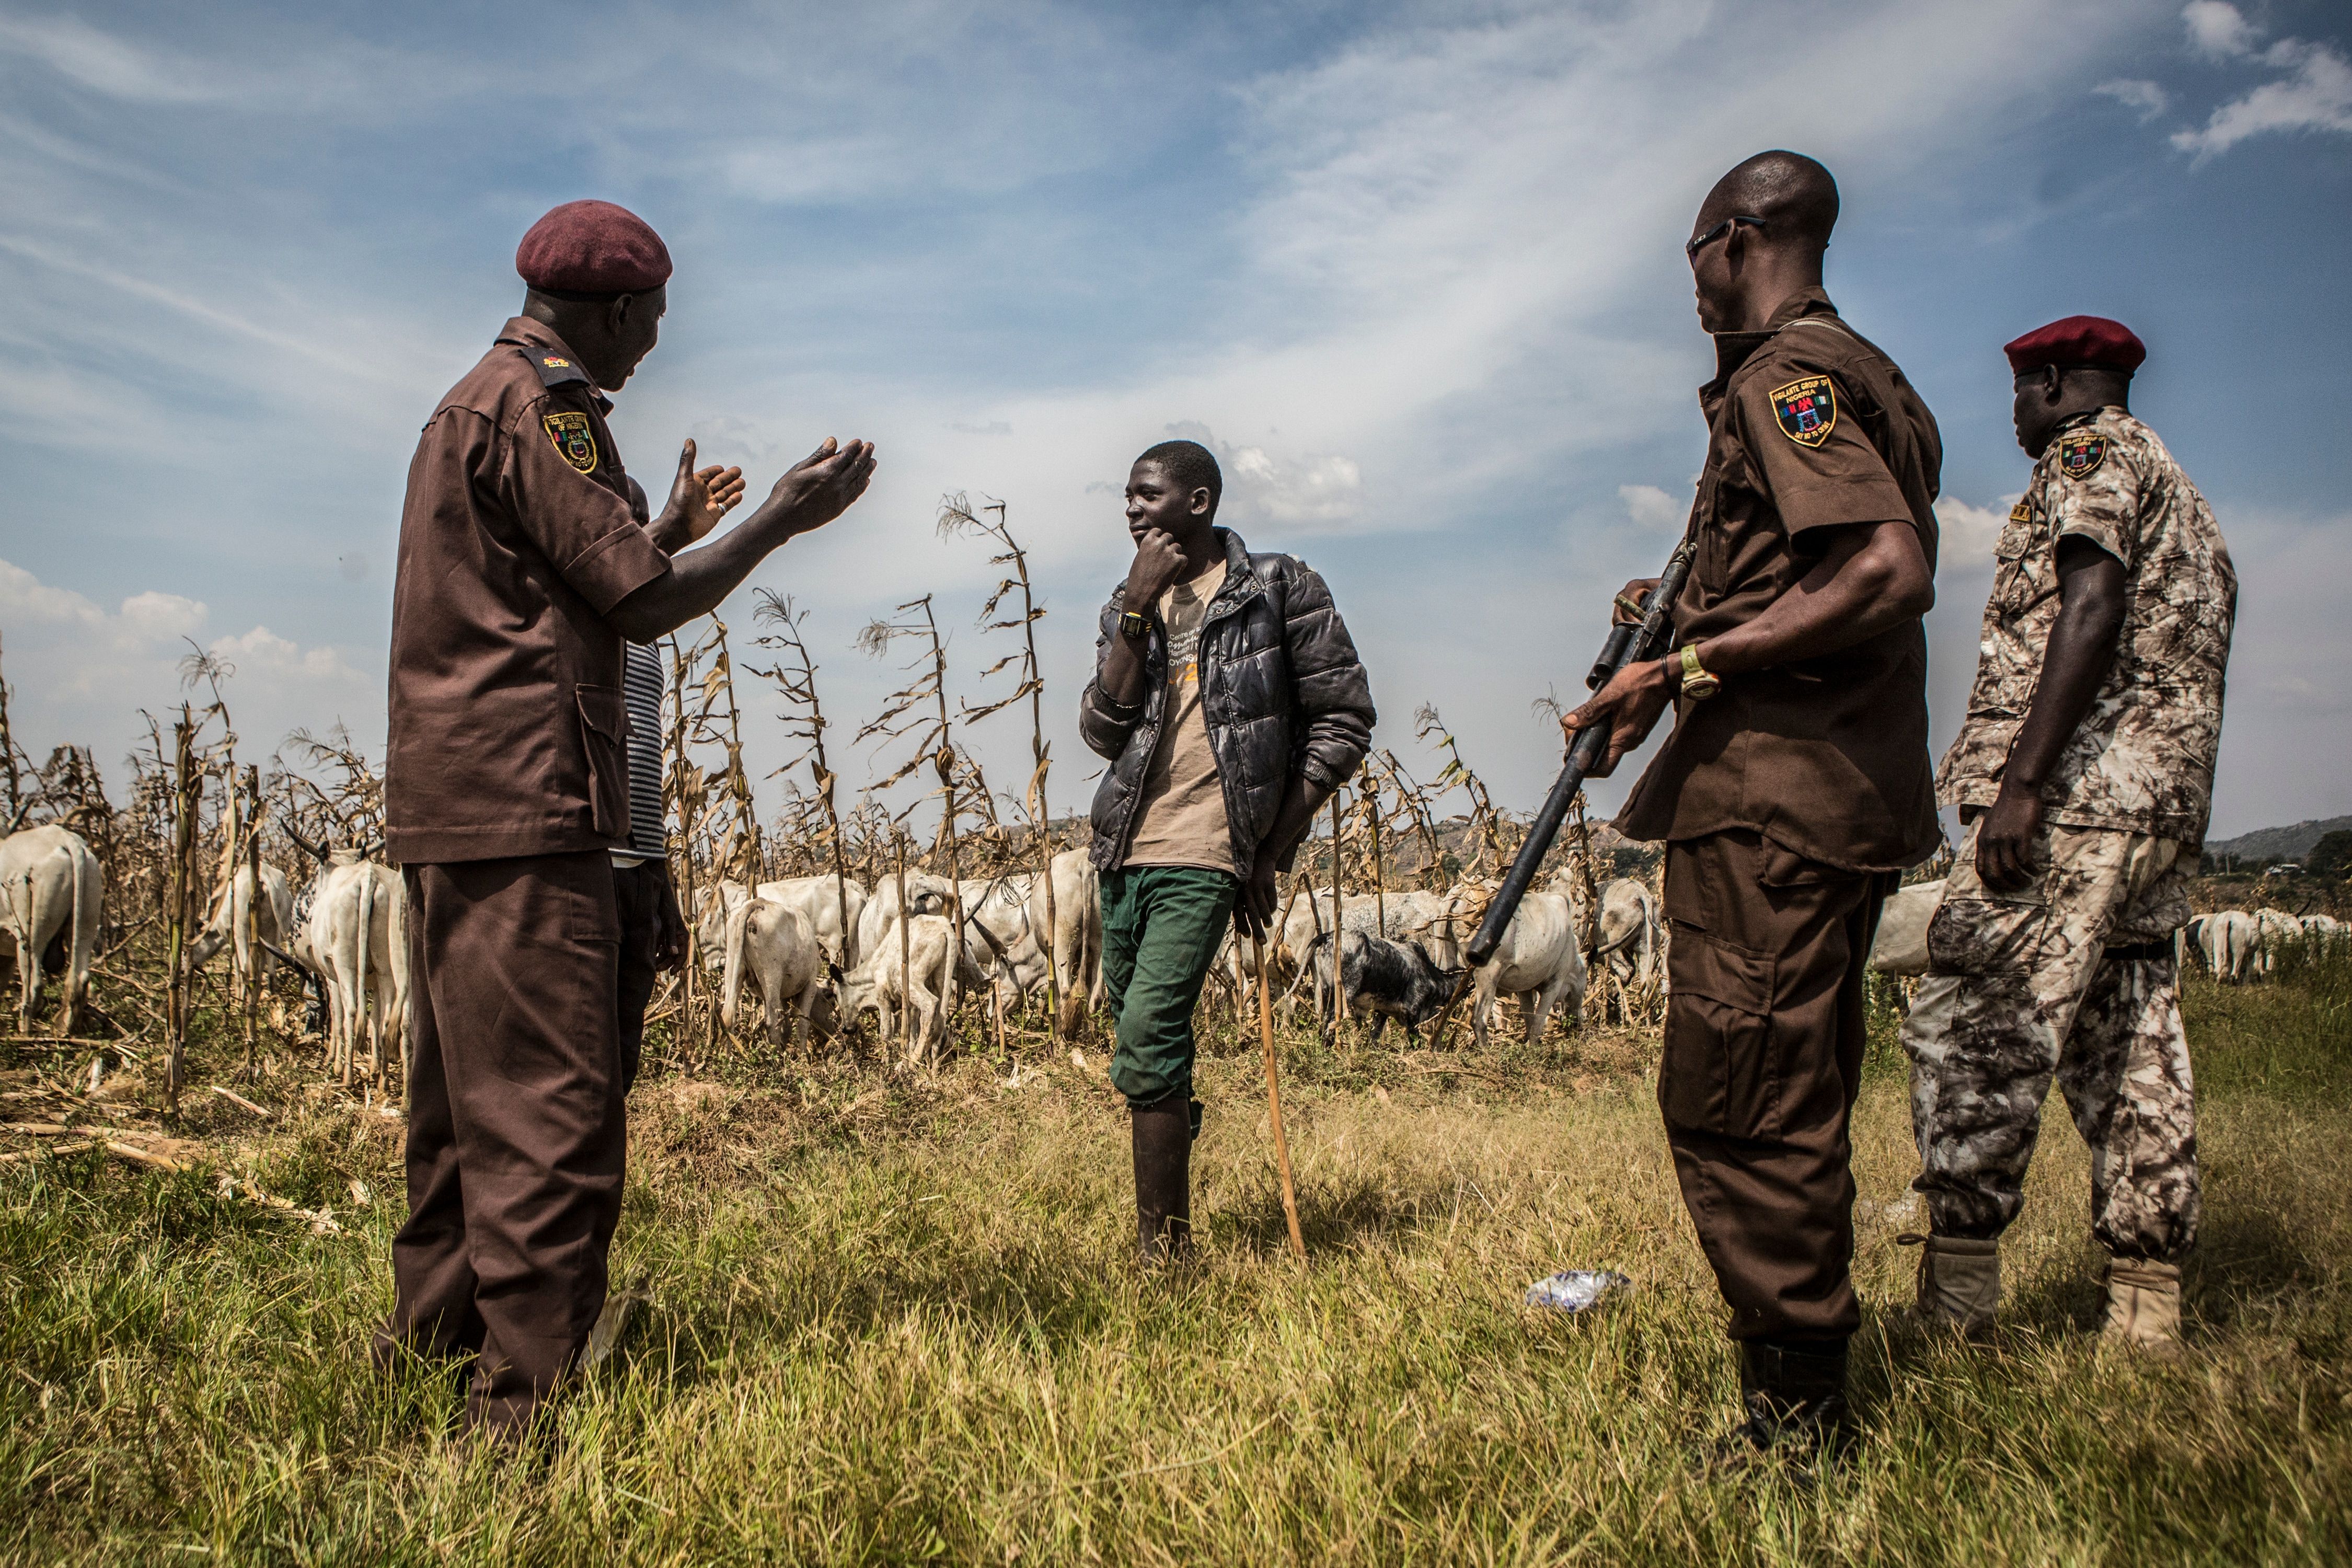 Members of the Barkin Ladi division of the Vigilante Groups of Nigeria urge a young herder in October to keep his animals off farmland with crops in Barkin Ladi, Nigeria. Vigilantes here are volunteer peacekeepers. Image by Jane Hahn. Nigeria, 2018.